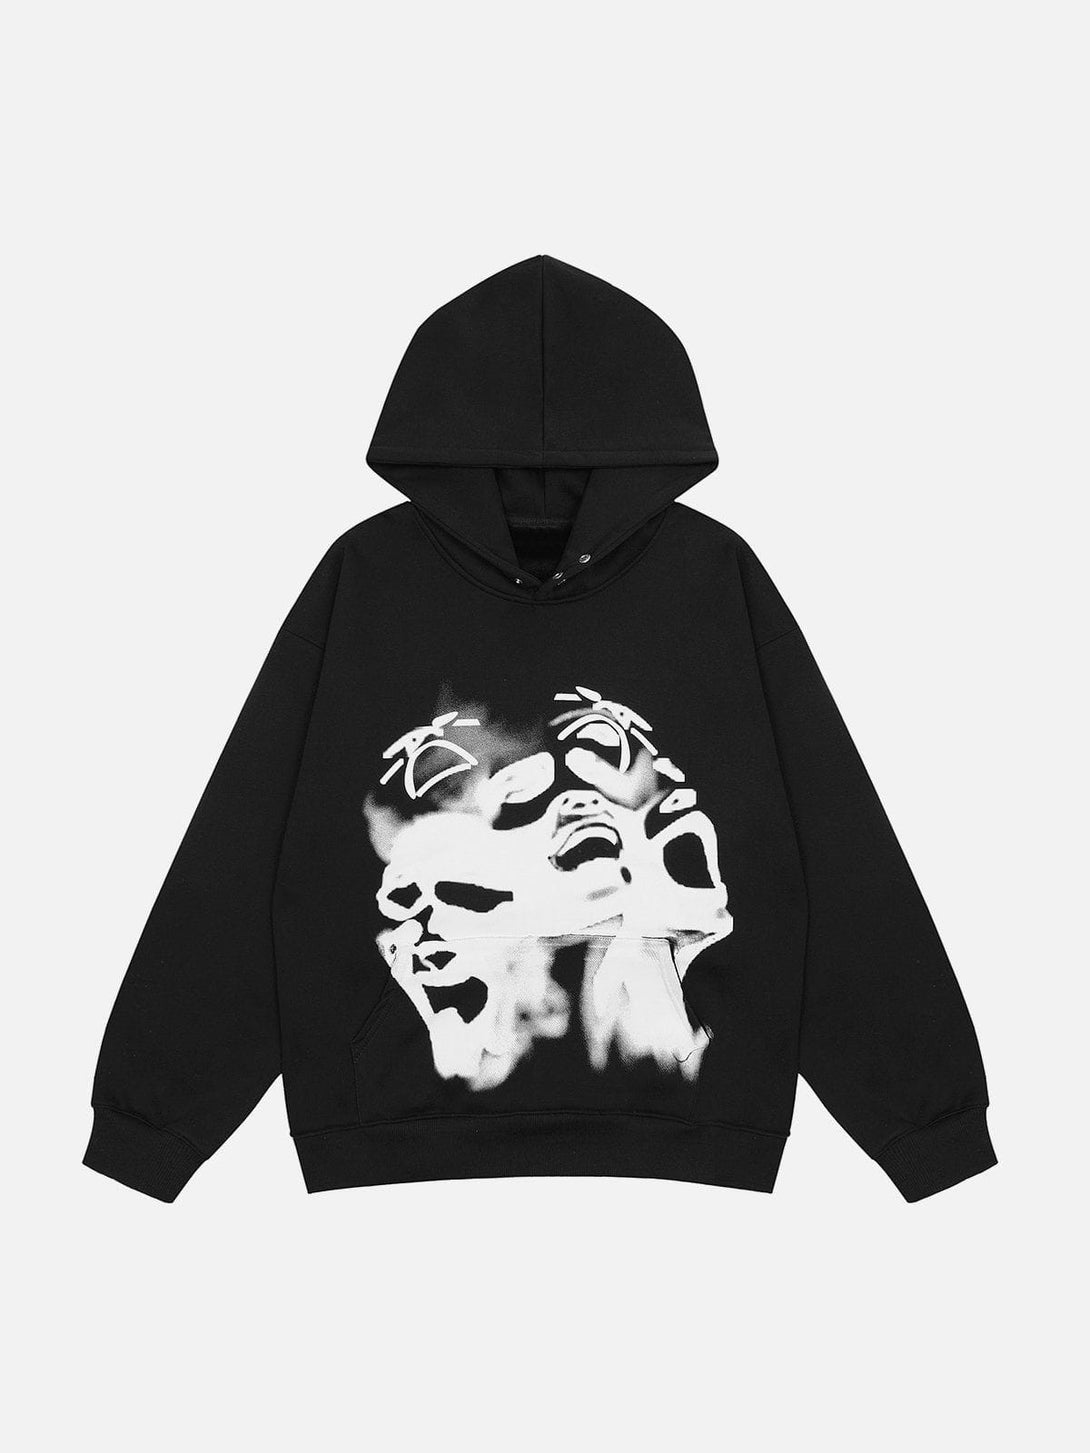 Levefly - Abstract Figure Print Hoodie - Streetwear Fashion - levefly.com